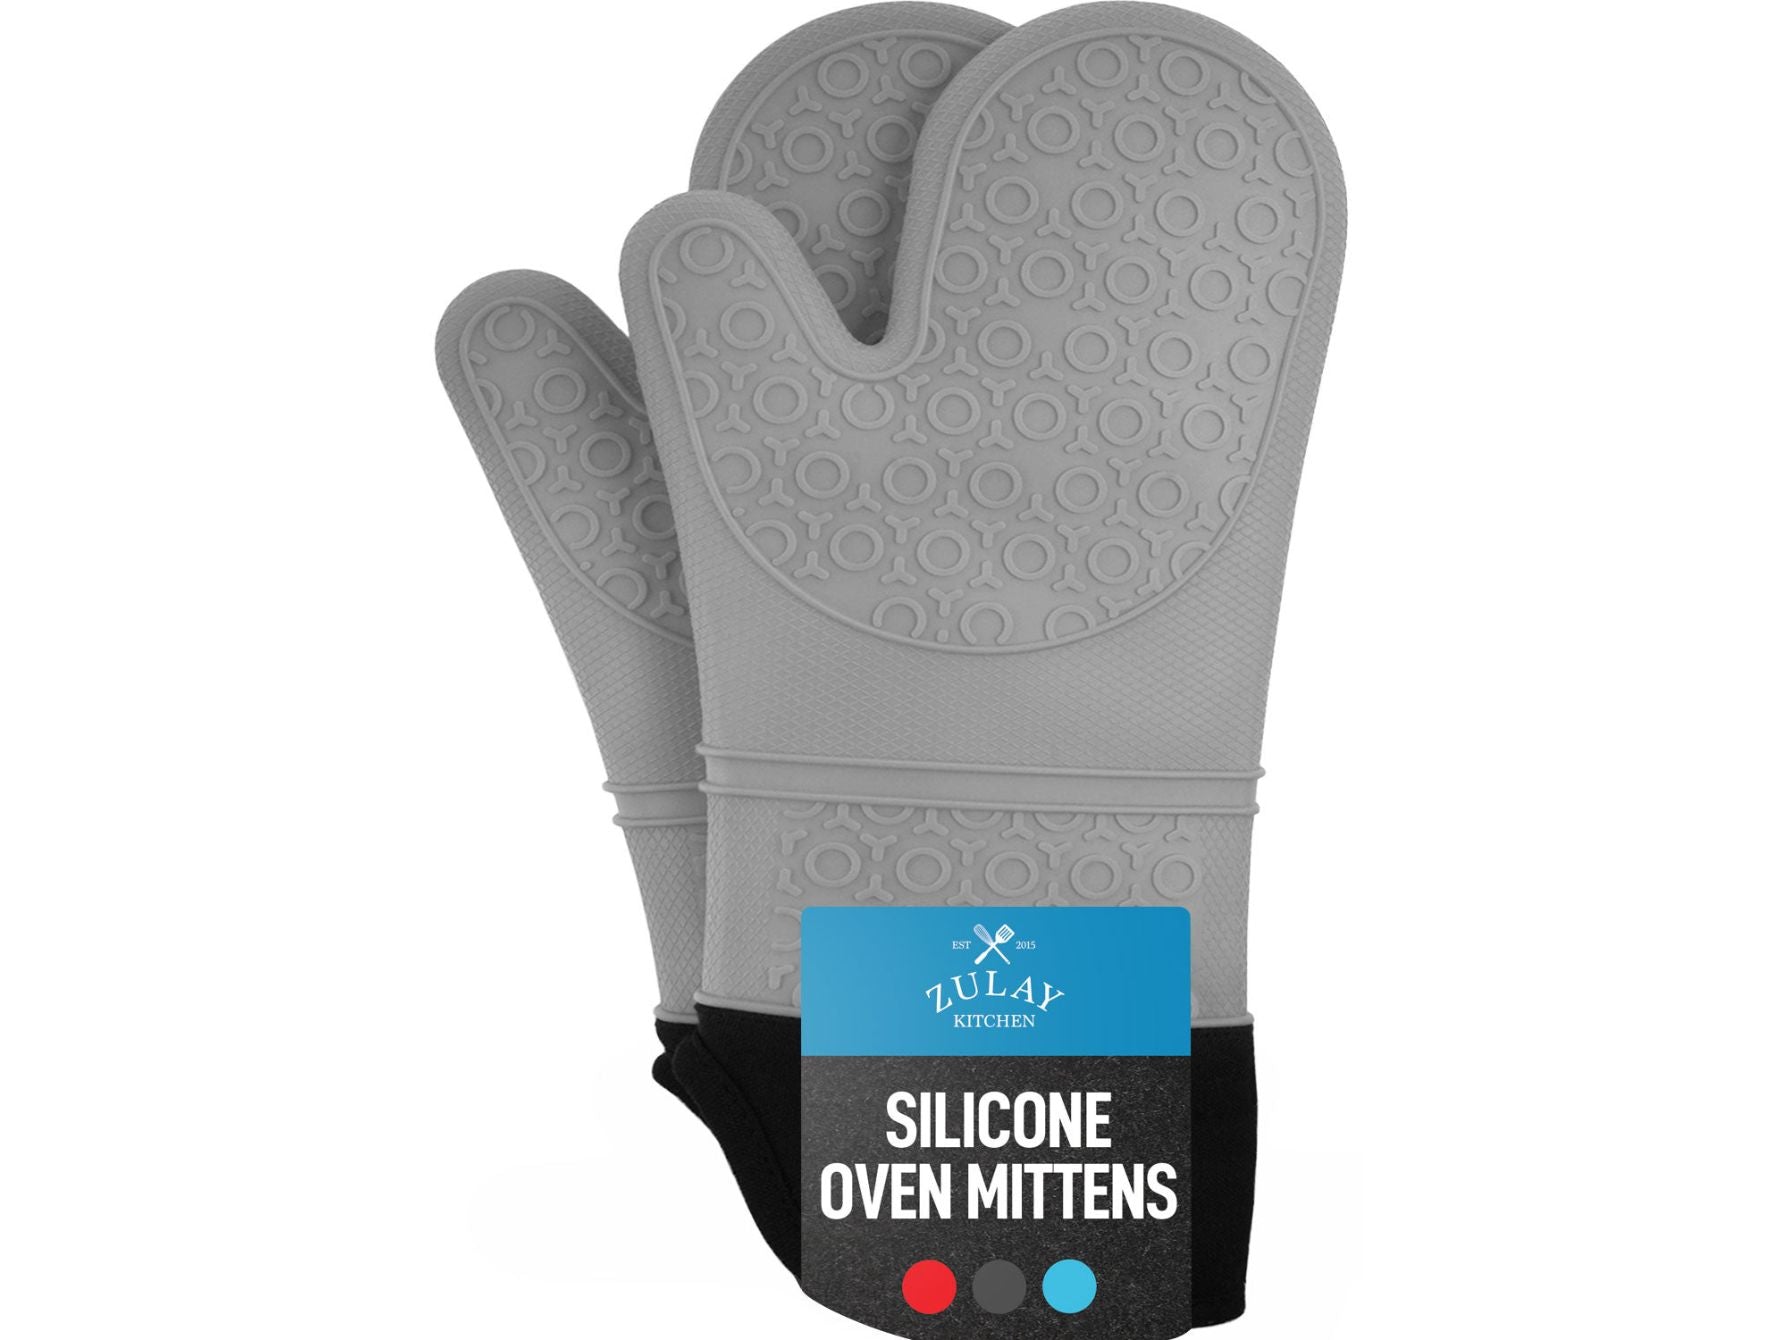 Silicone Oven Mitts by Zulay Kitchen